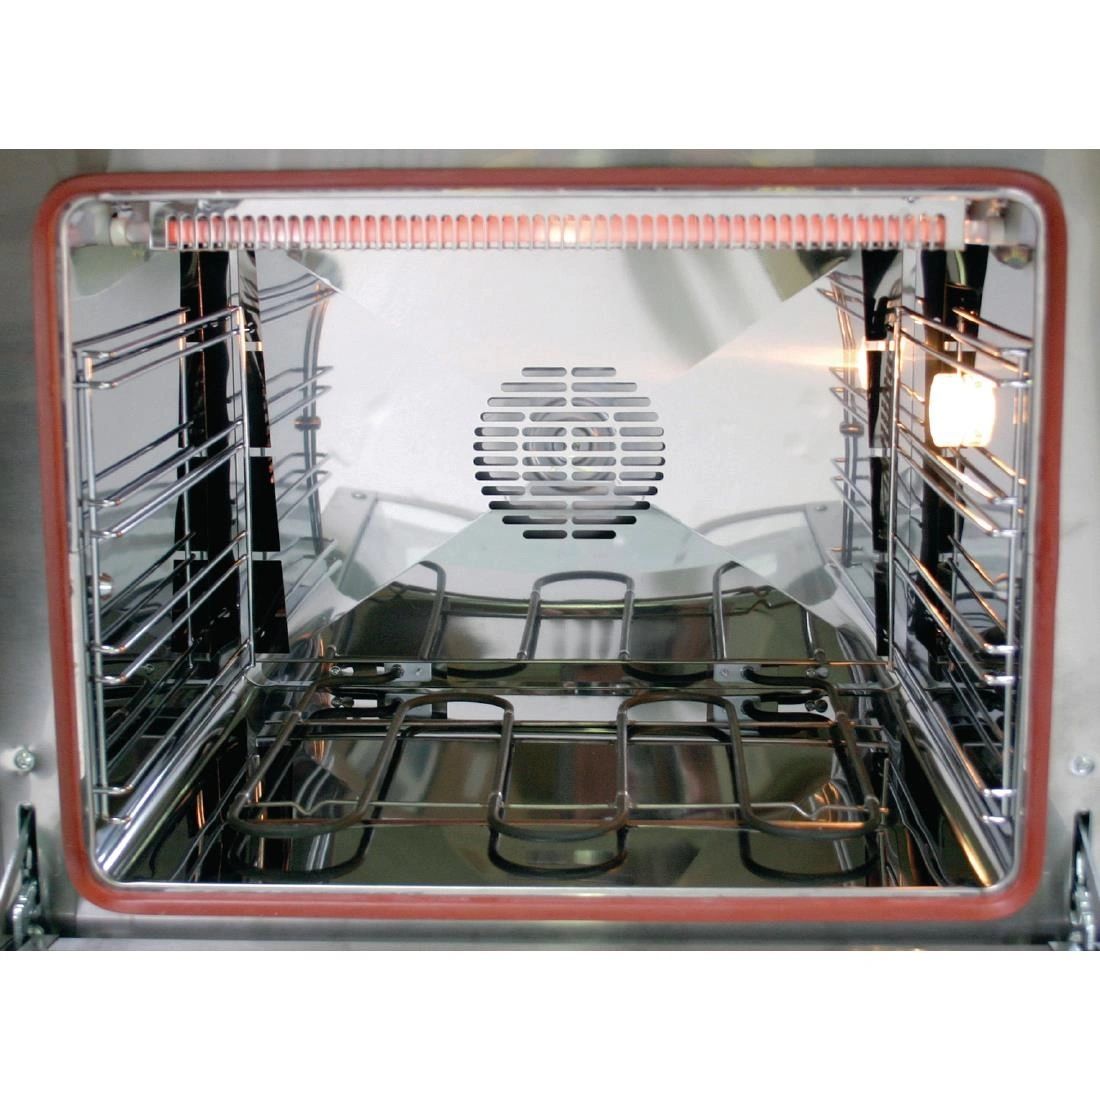 Roller Grill Turbo Quartz Convection Oven FC60TQ 3kW. Capacity: 4x  460x340mm trays